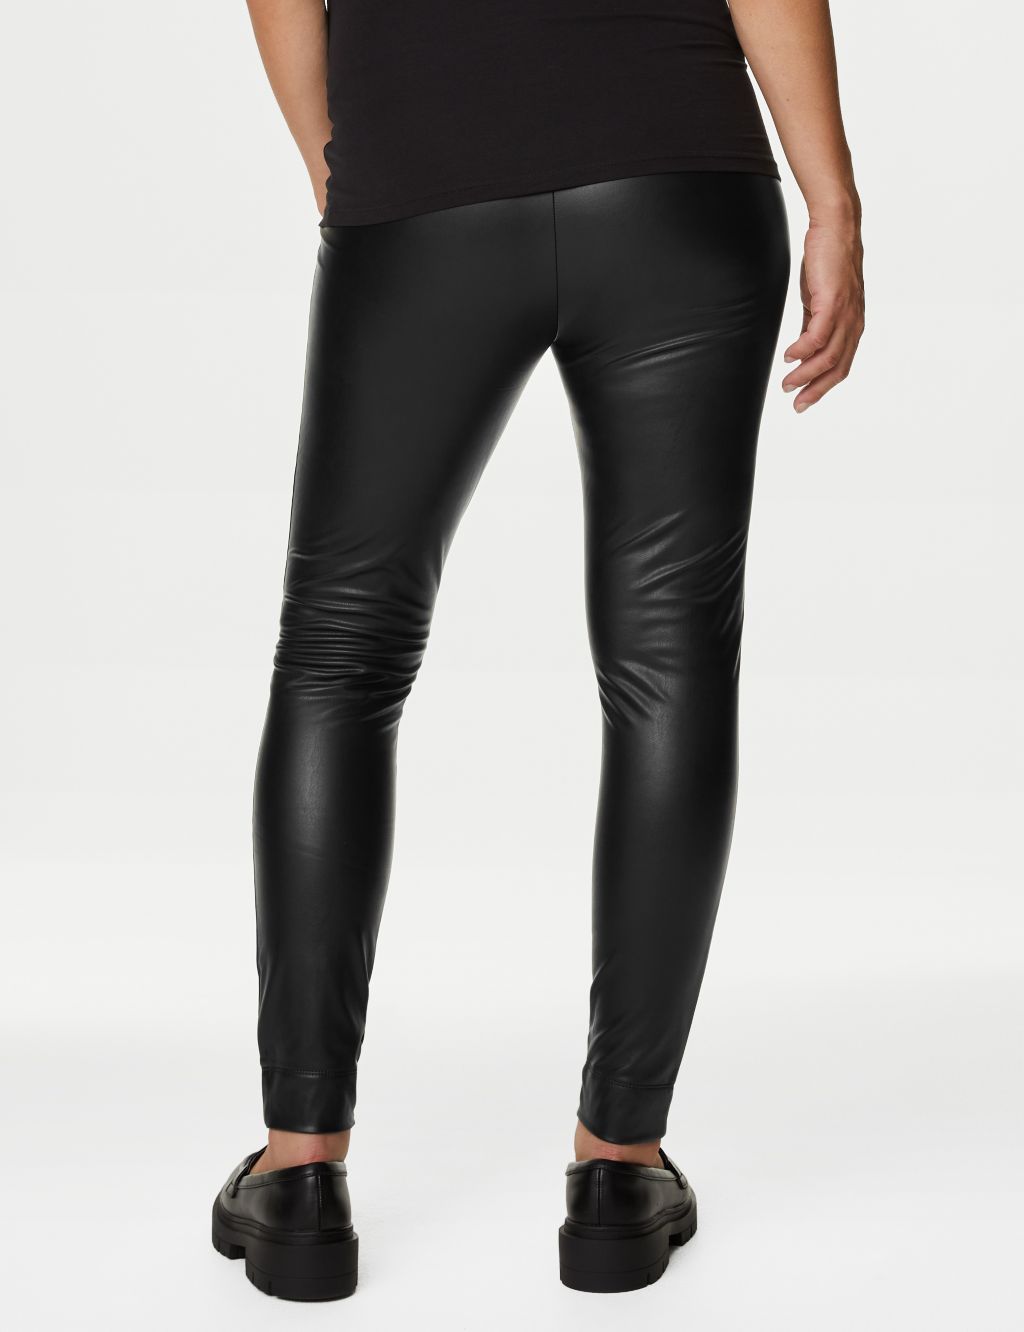 Maternity Leather Look Over Bump Leggings image 6